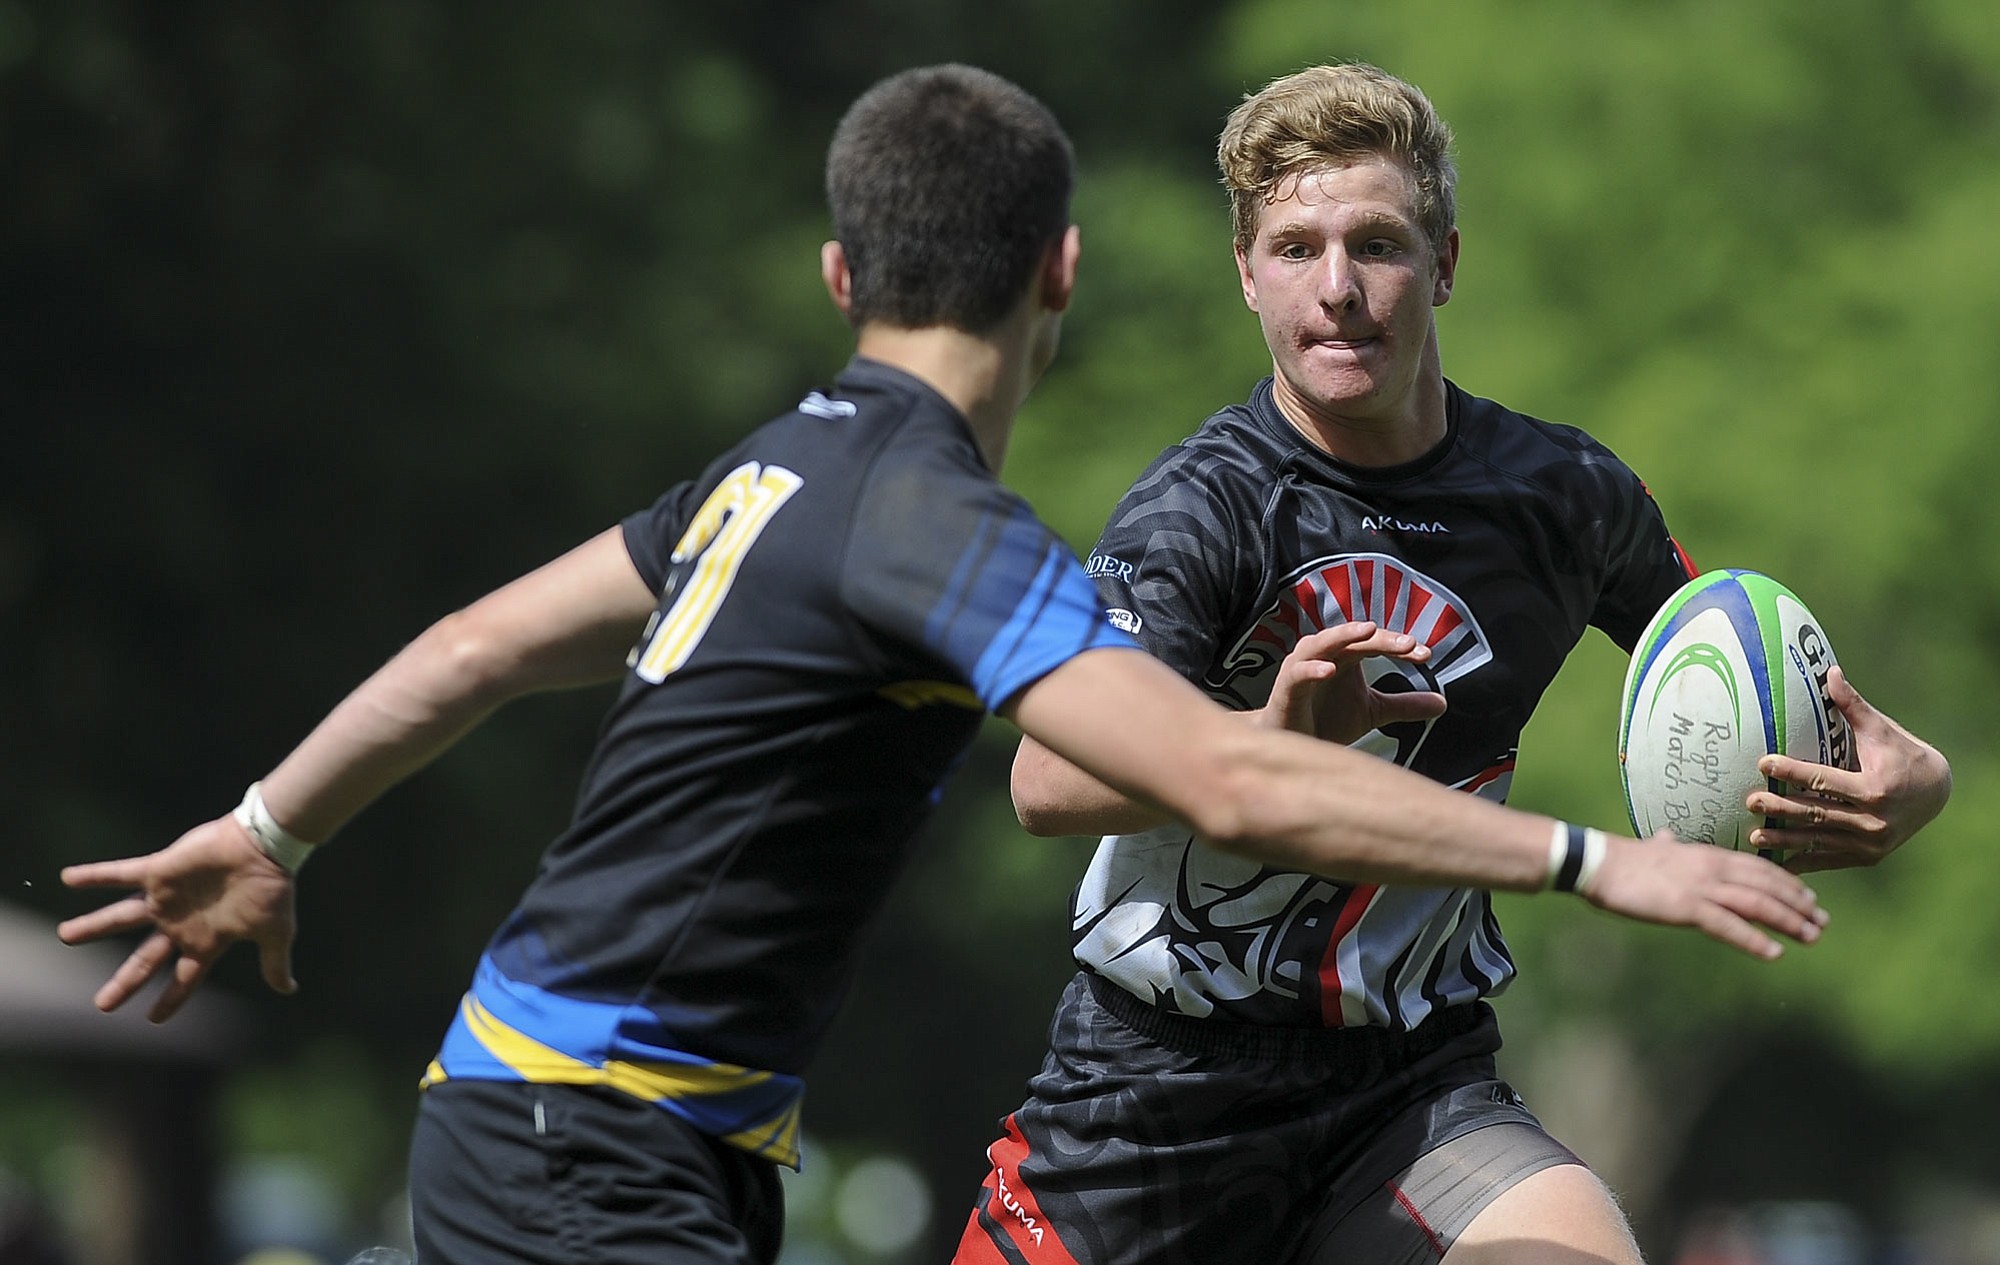 Brendon Curle of Union tries to thwart a Newberg player from gaining control of the ball in the Rugby Oregon Varsity Premiership state championship game in Portland on Saturday, May 30, 2015.